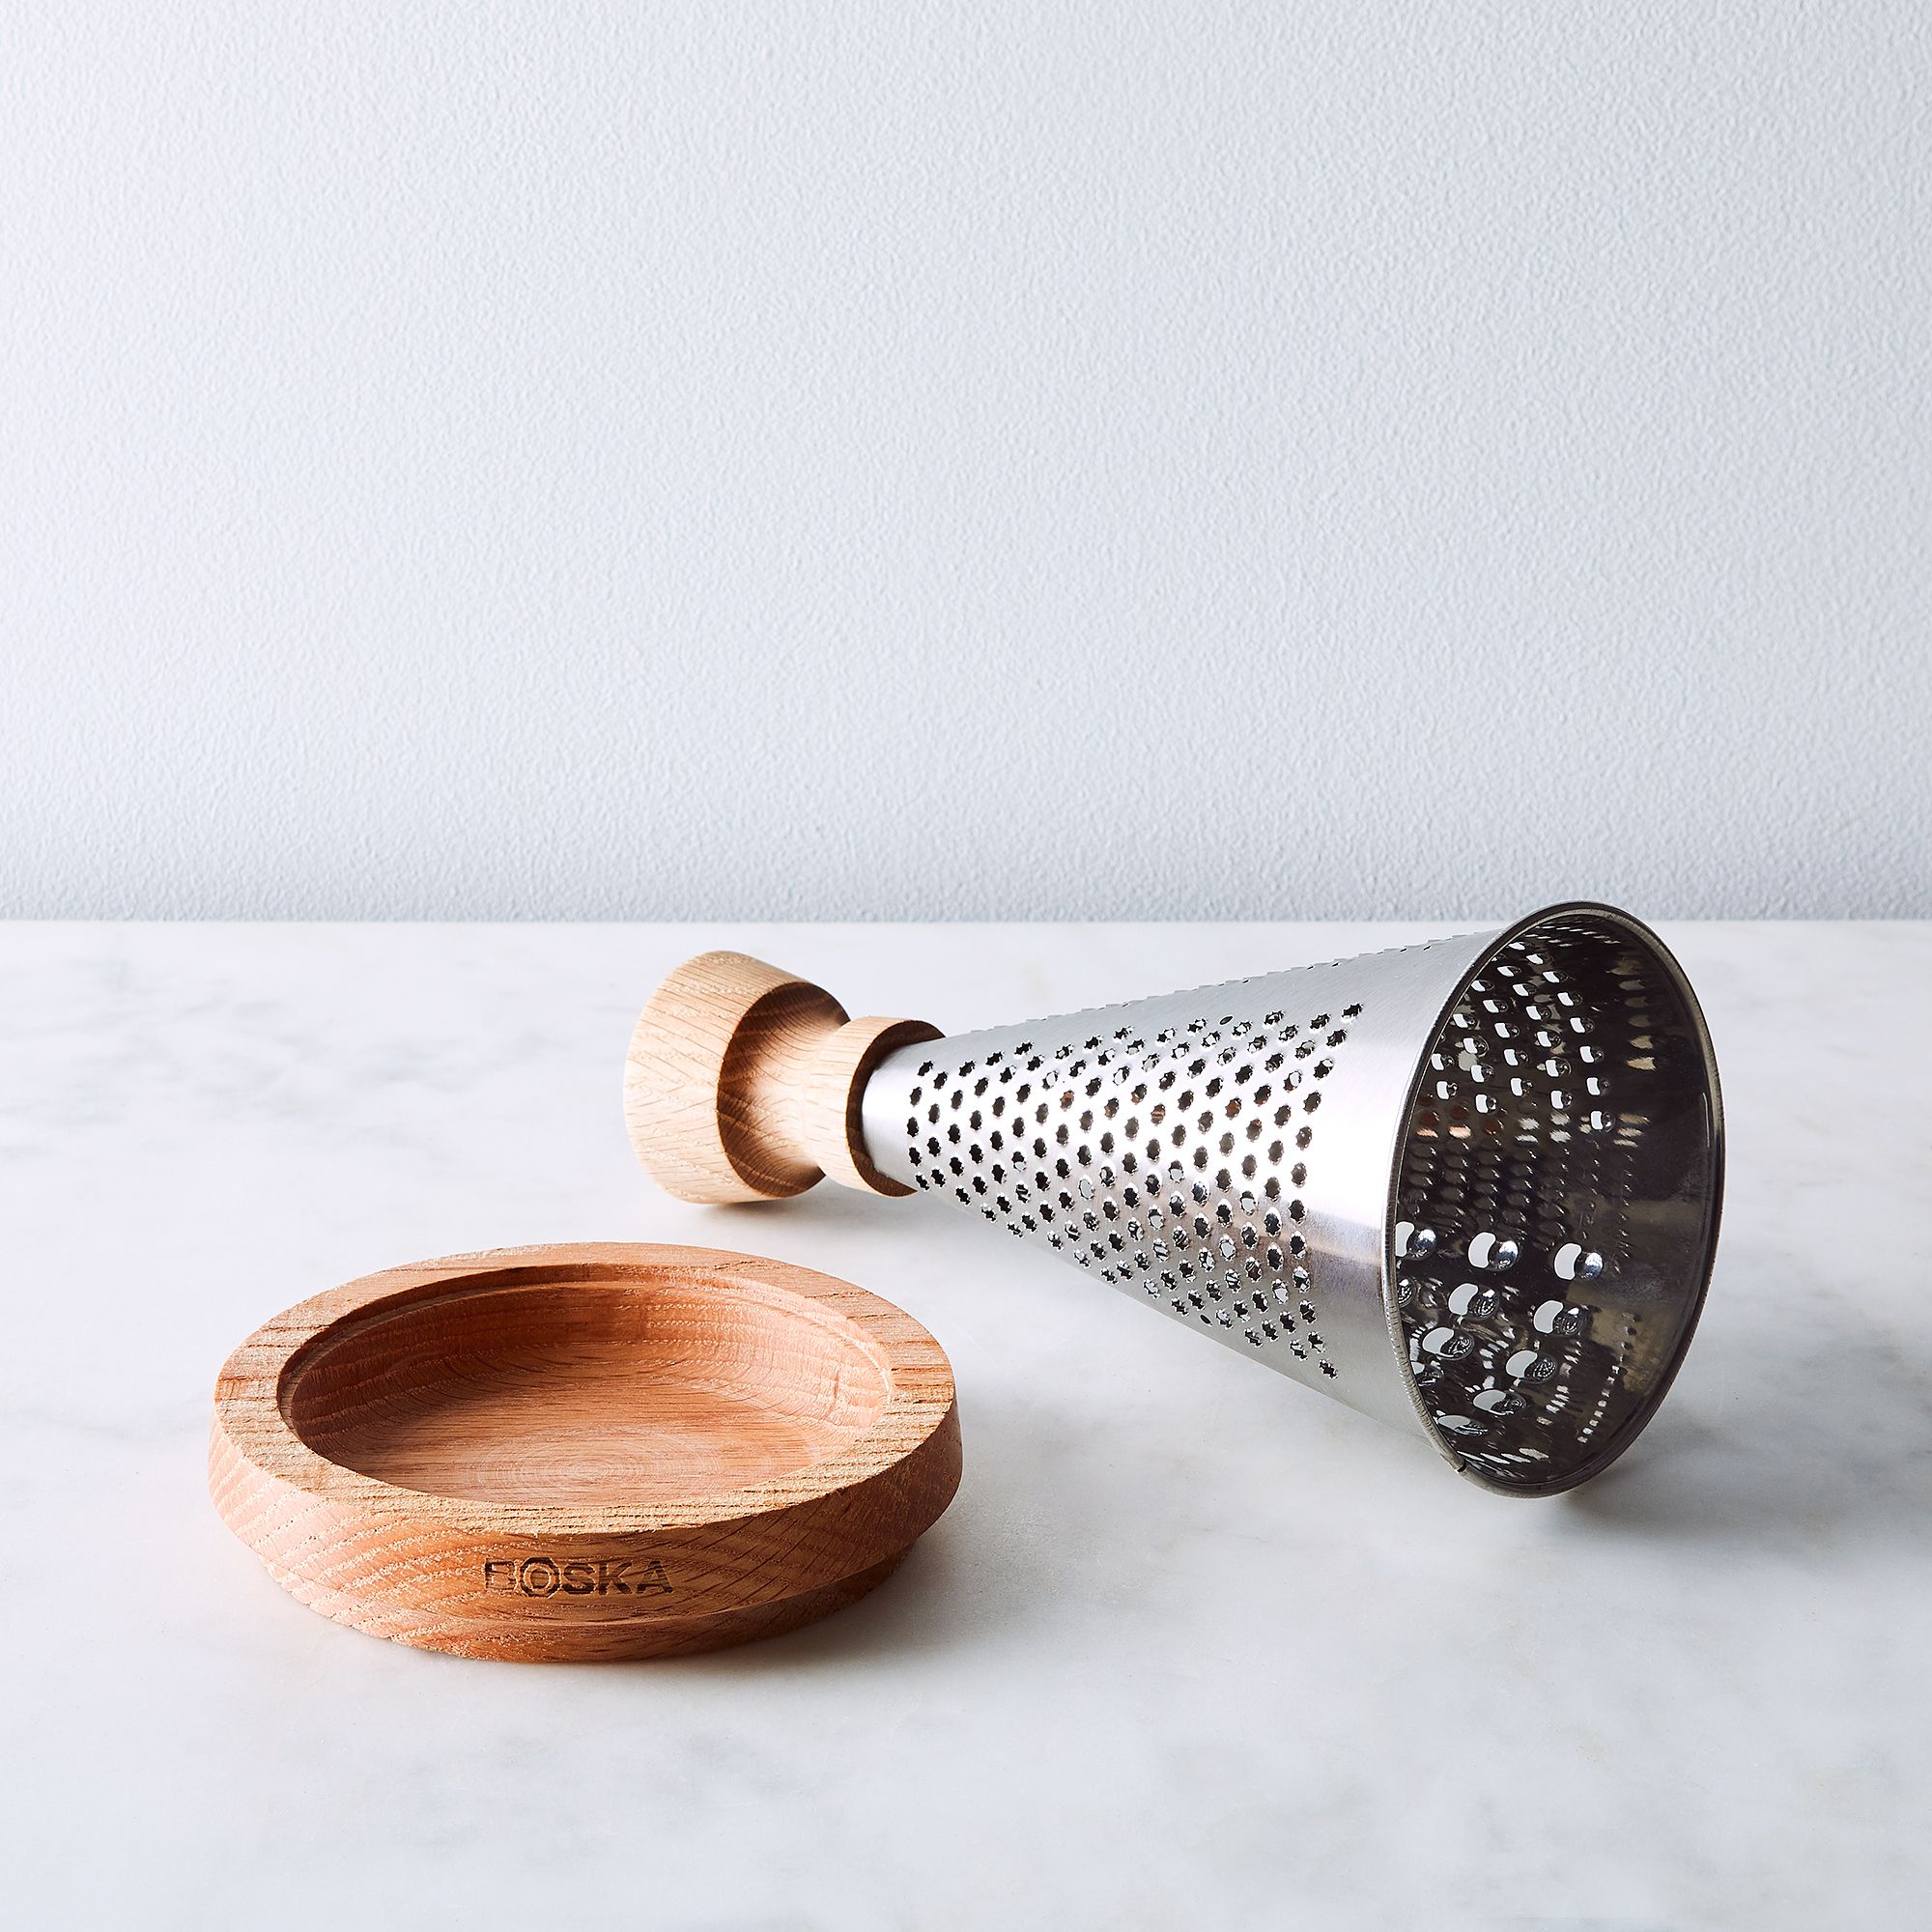 Boska Oak Table Cheese Grater, Stainless Steel & European Oak with Tray on  Food52